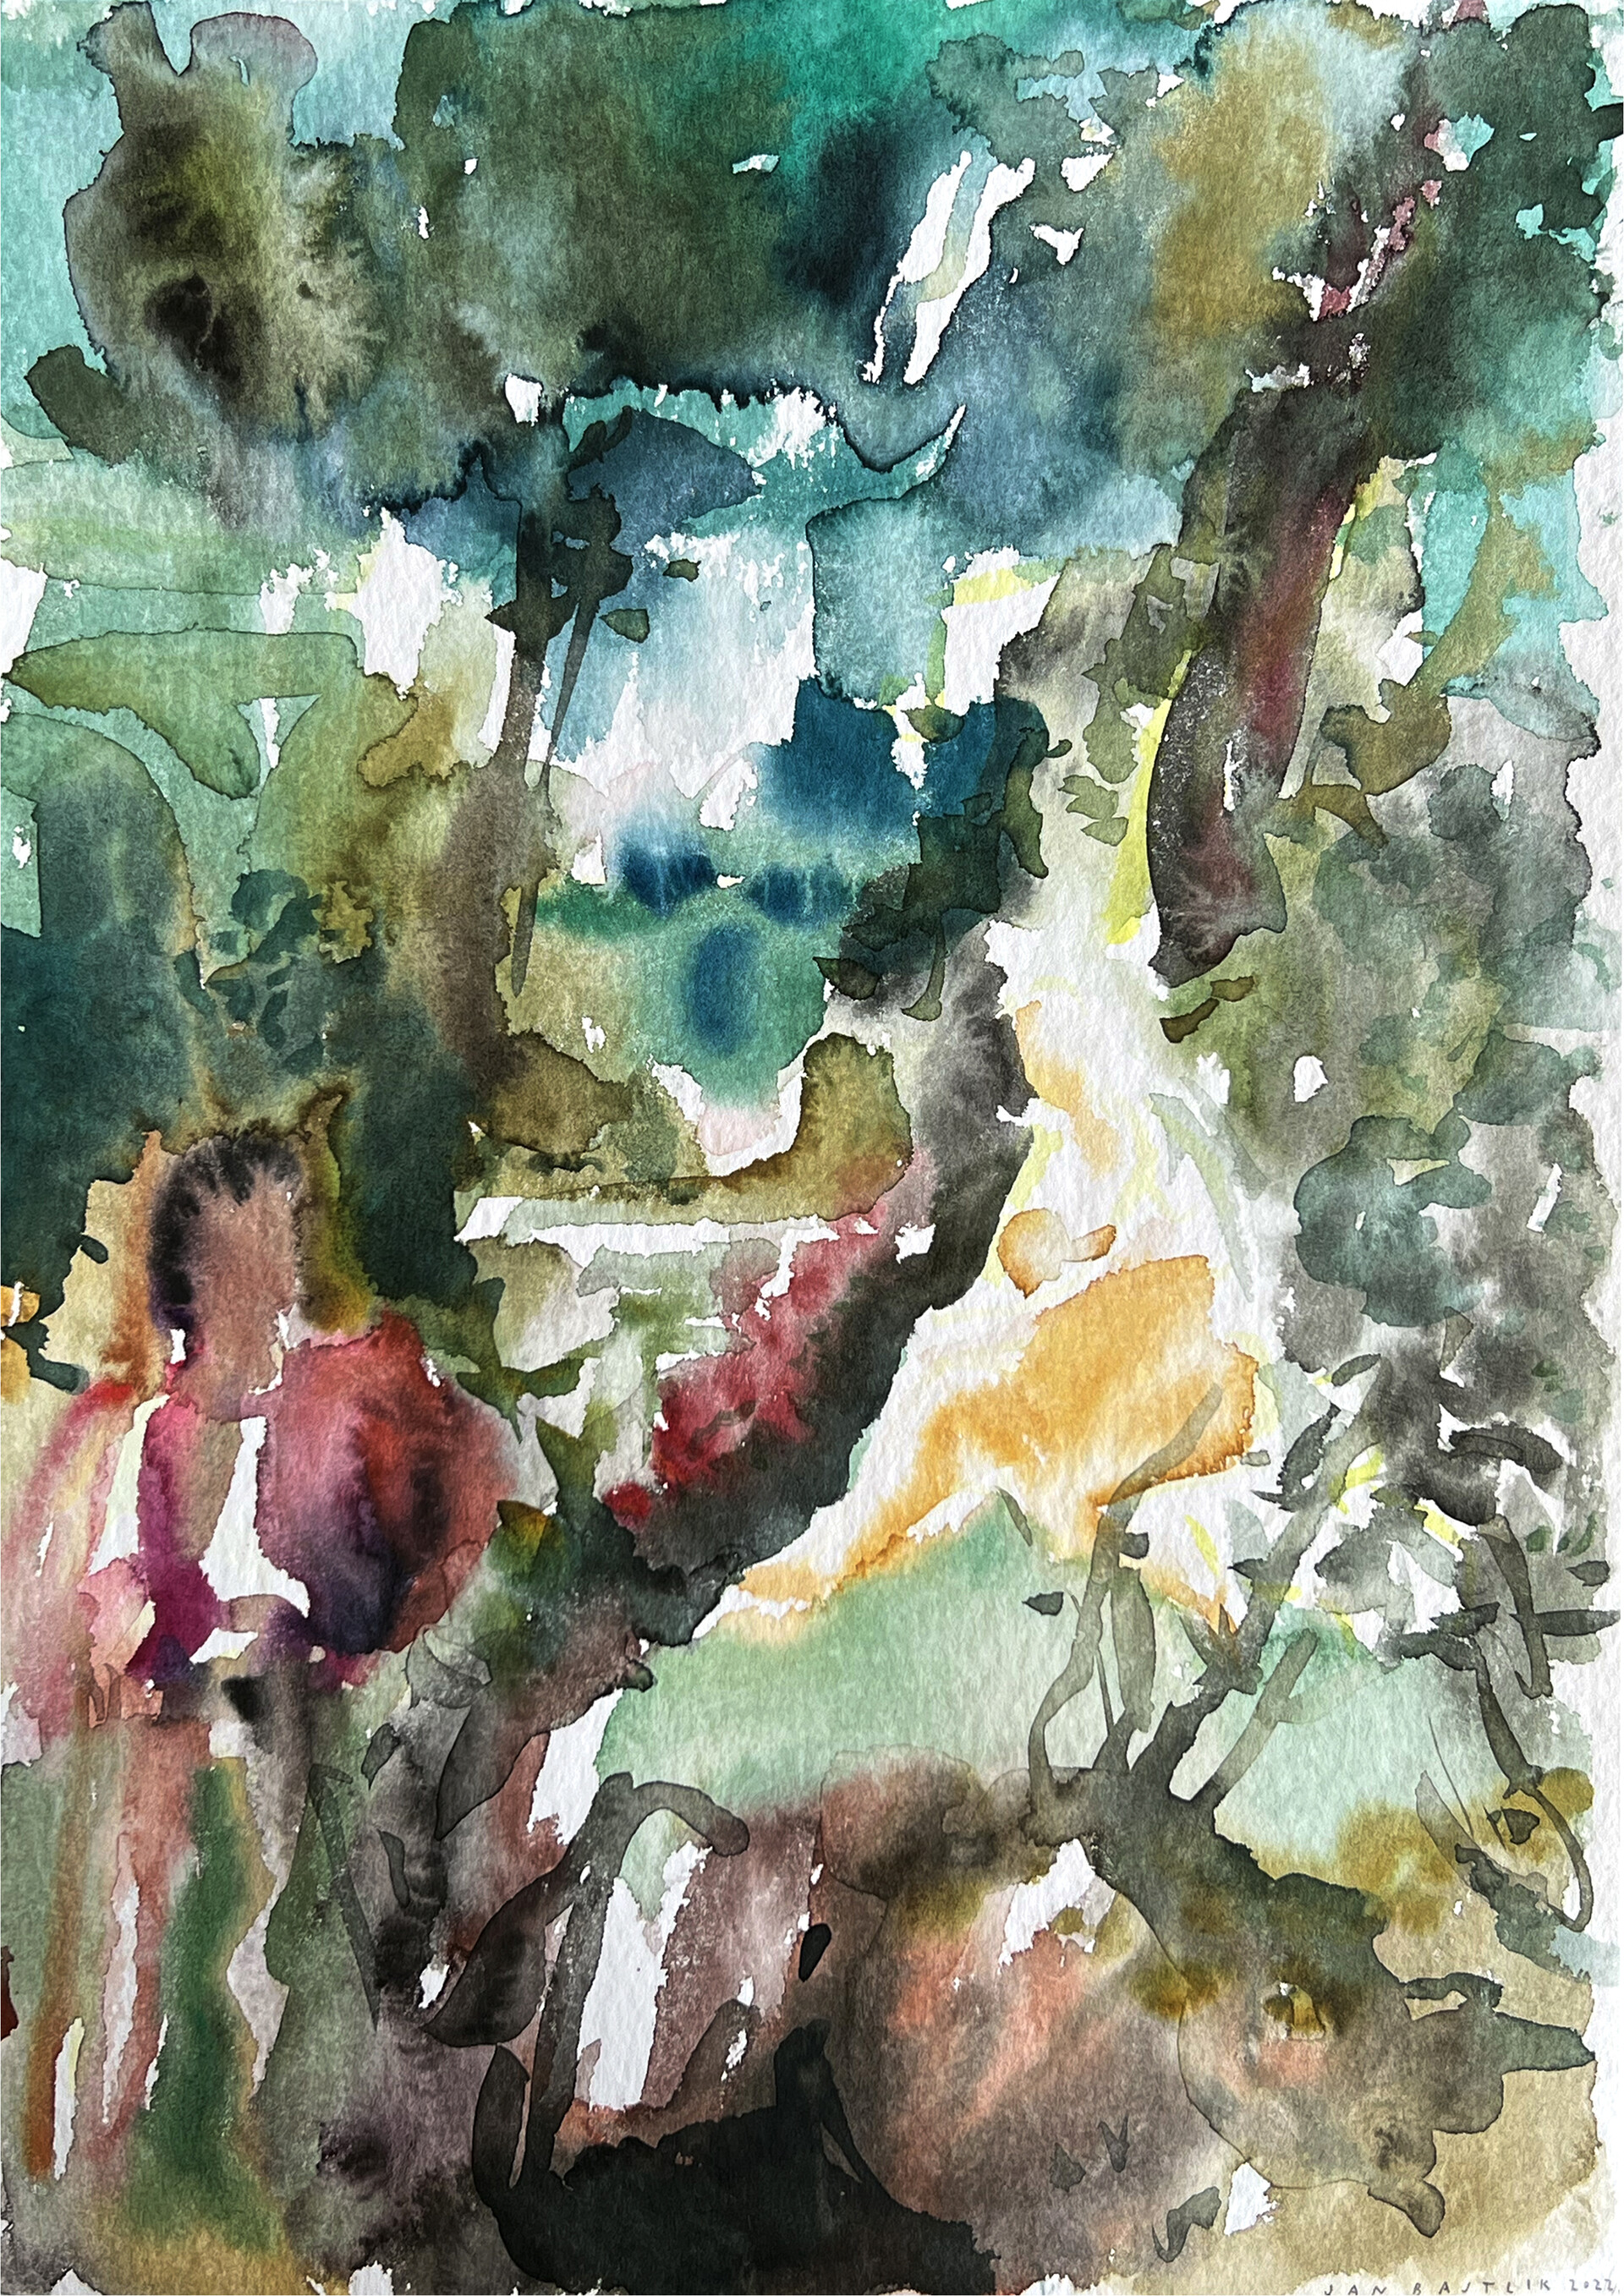 „The Tempest” inspired by the work of Giorgione, 21 x 29,5 cm watercolours on paper, 2022